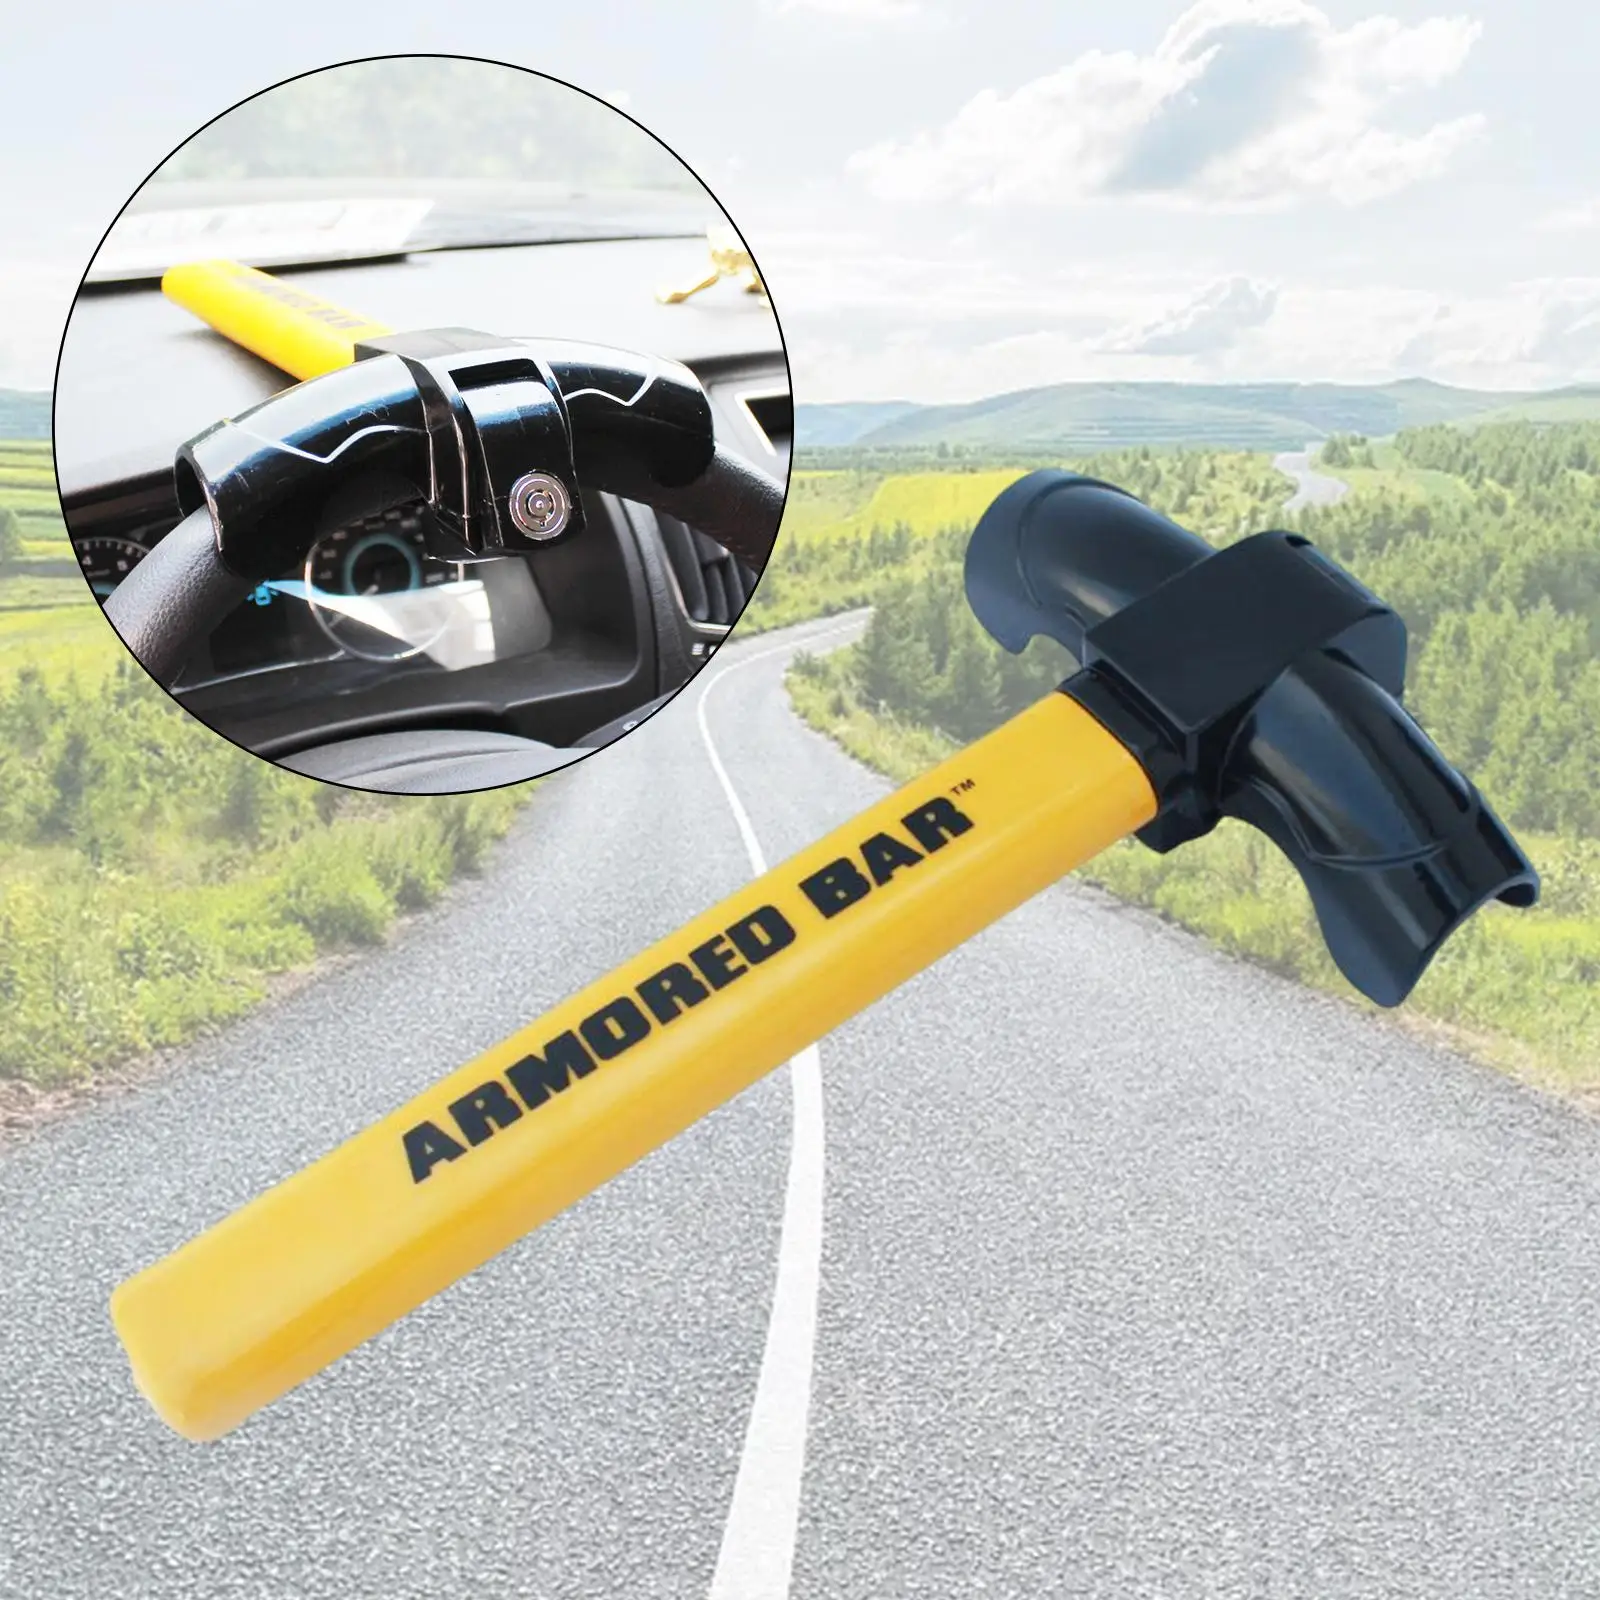 Car Steering Wheel Lock Durable Convenient Universal for Cars Vehicles